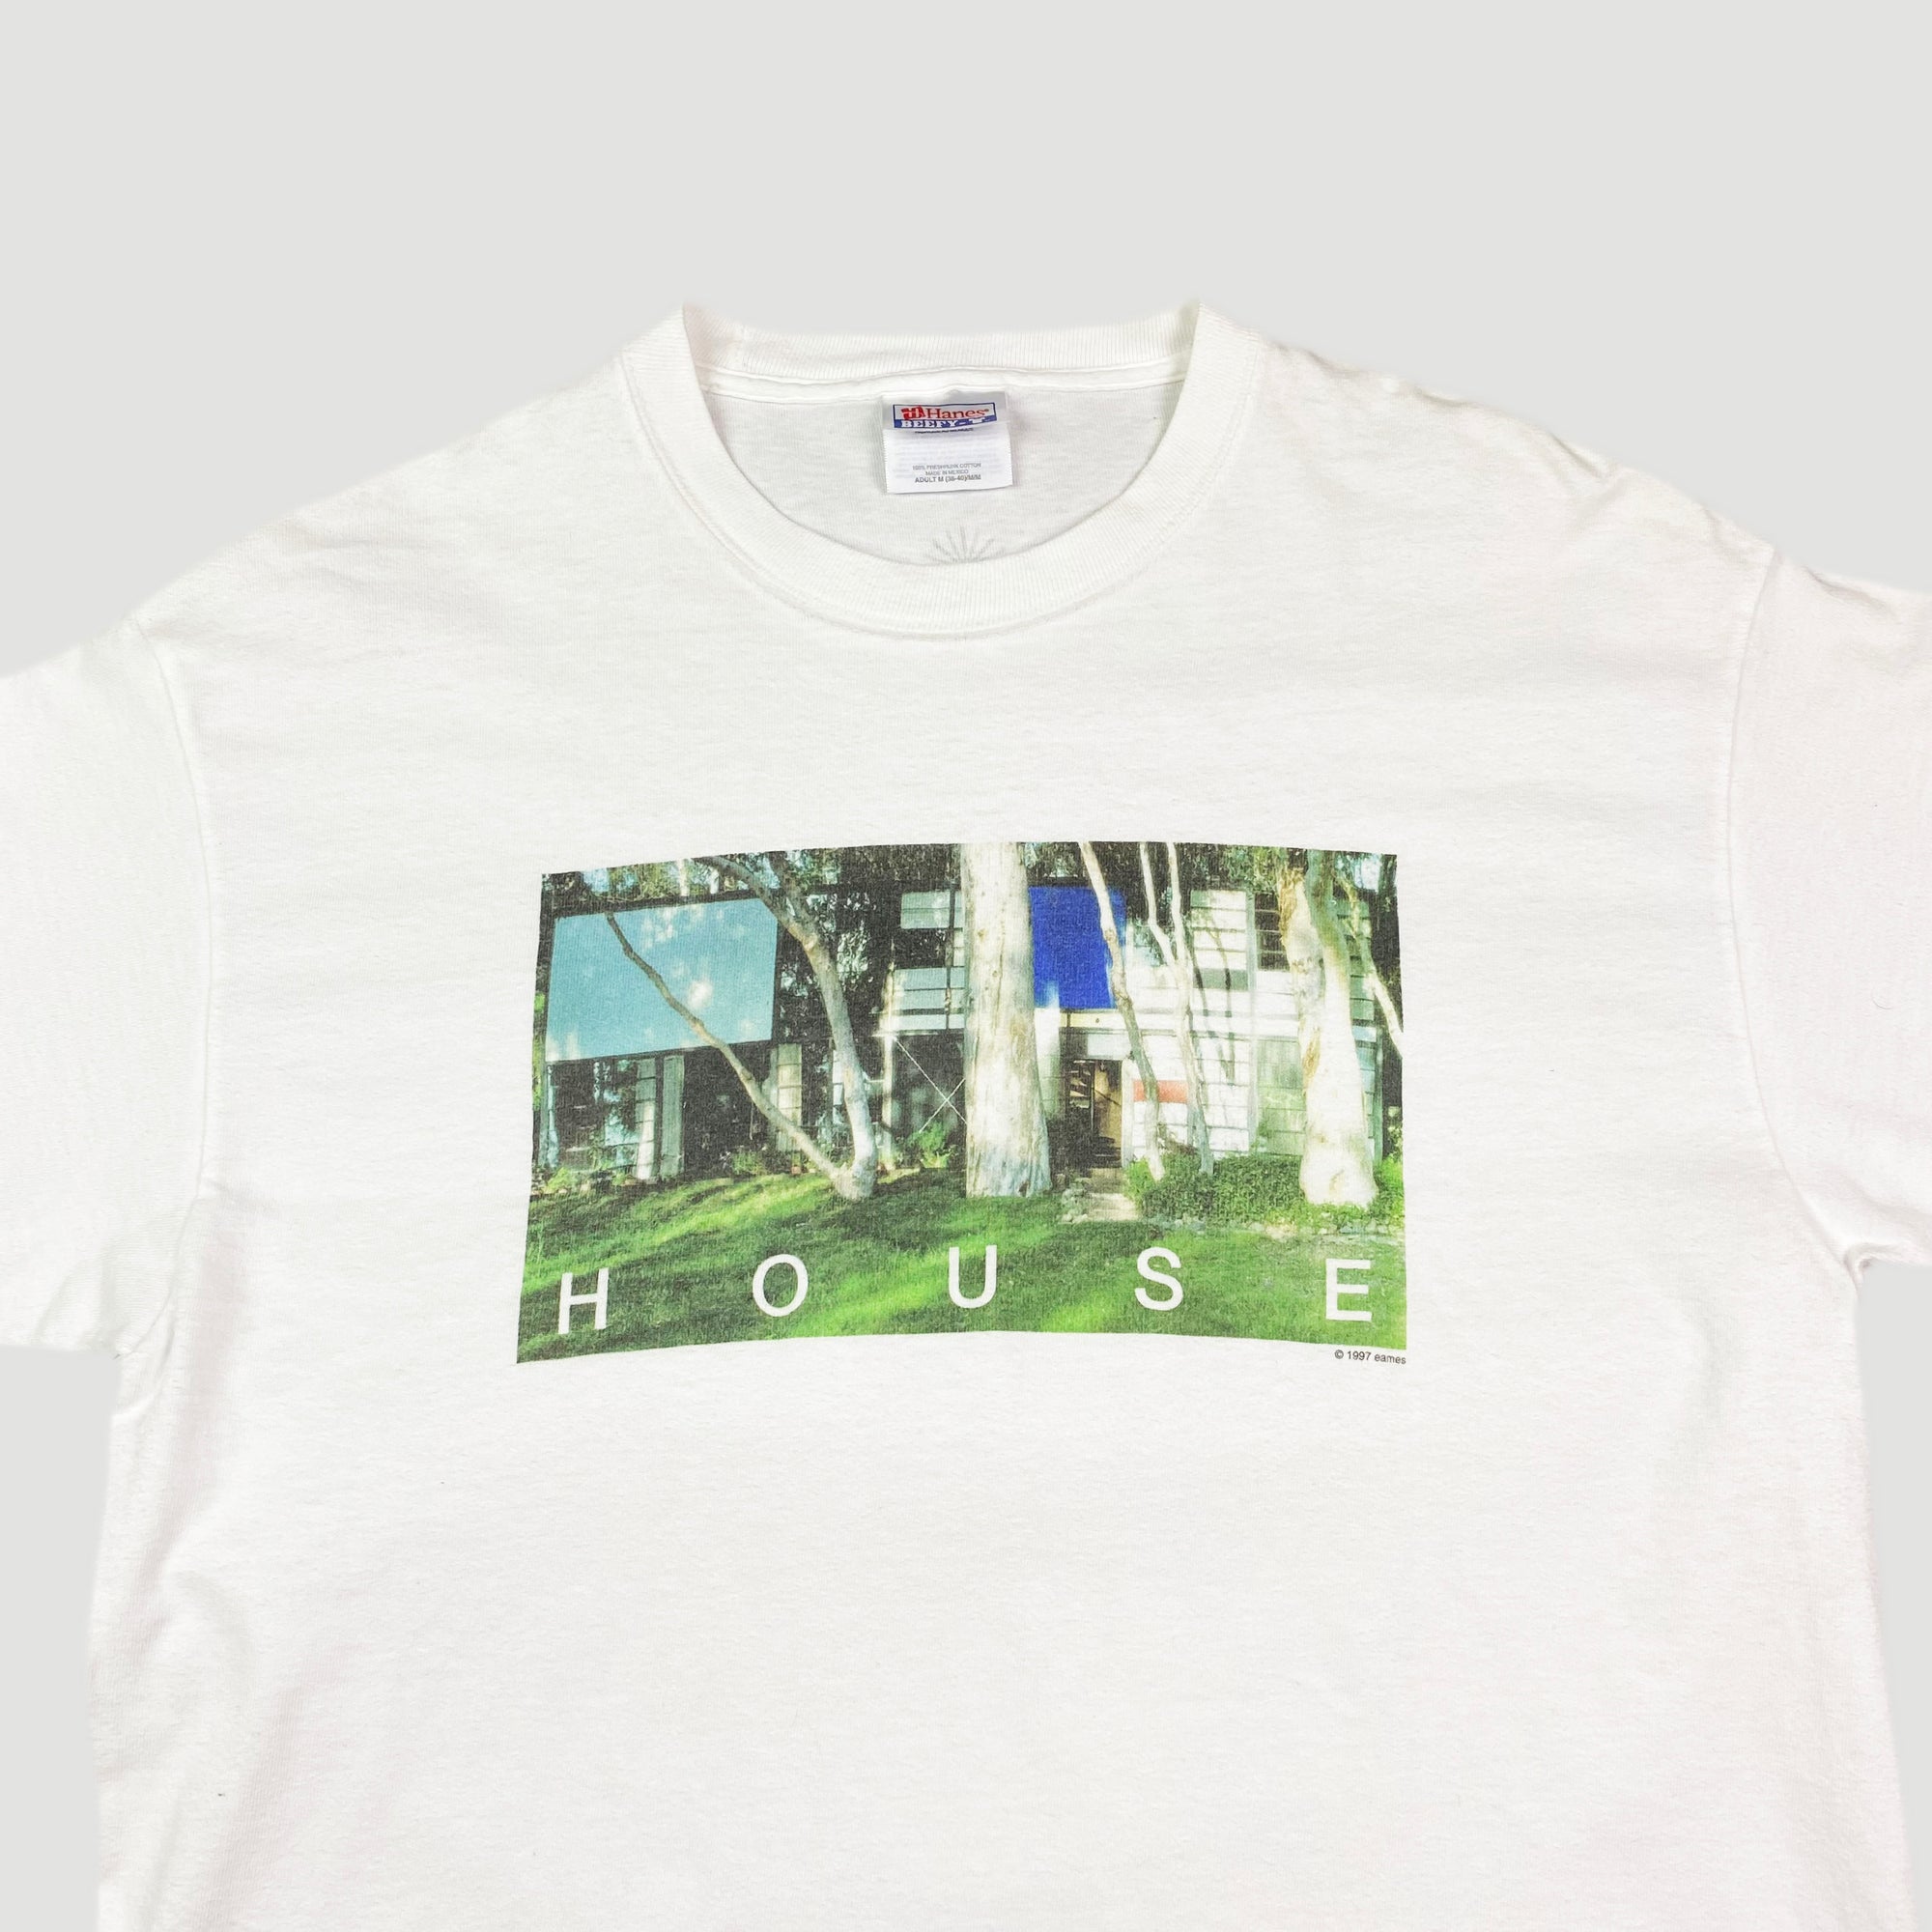 EAMES ヴィンテージTシャツ GLIMPSES OF THE U.S.A - Tシャツ ...